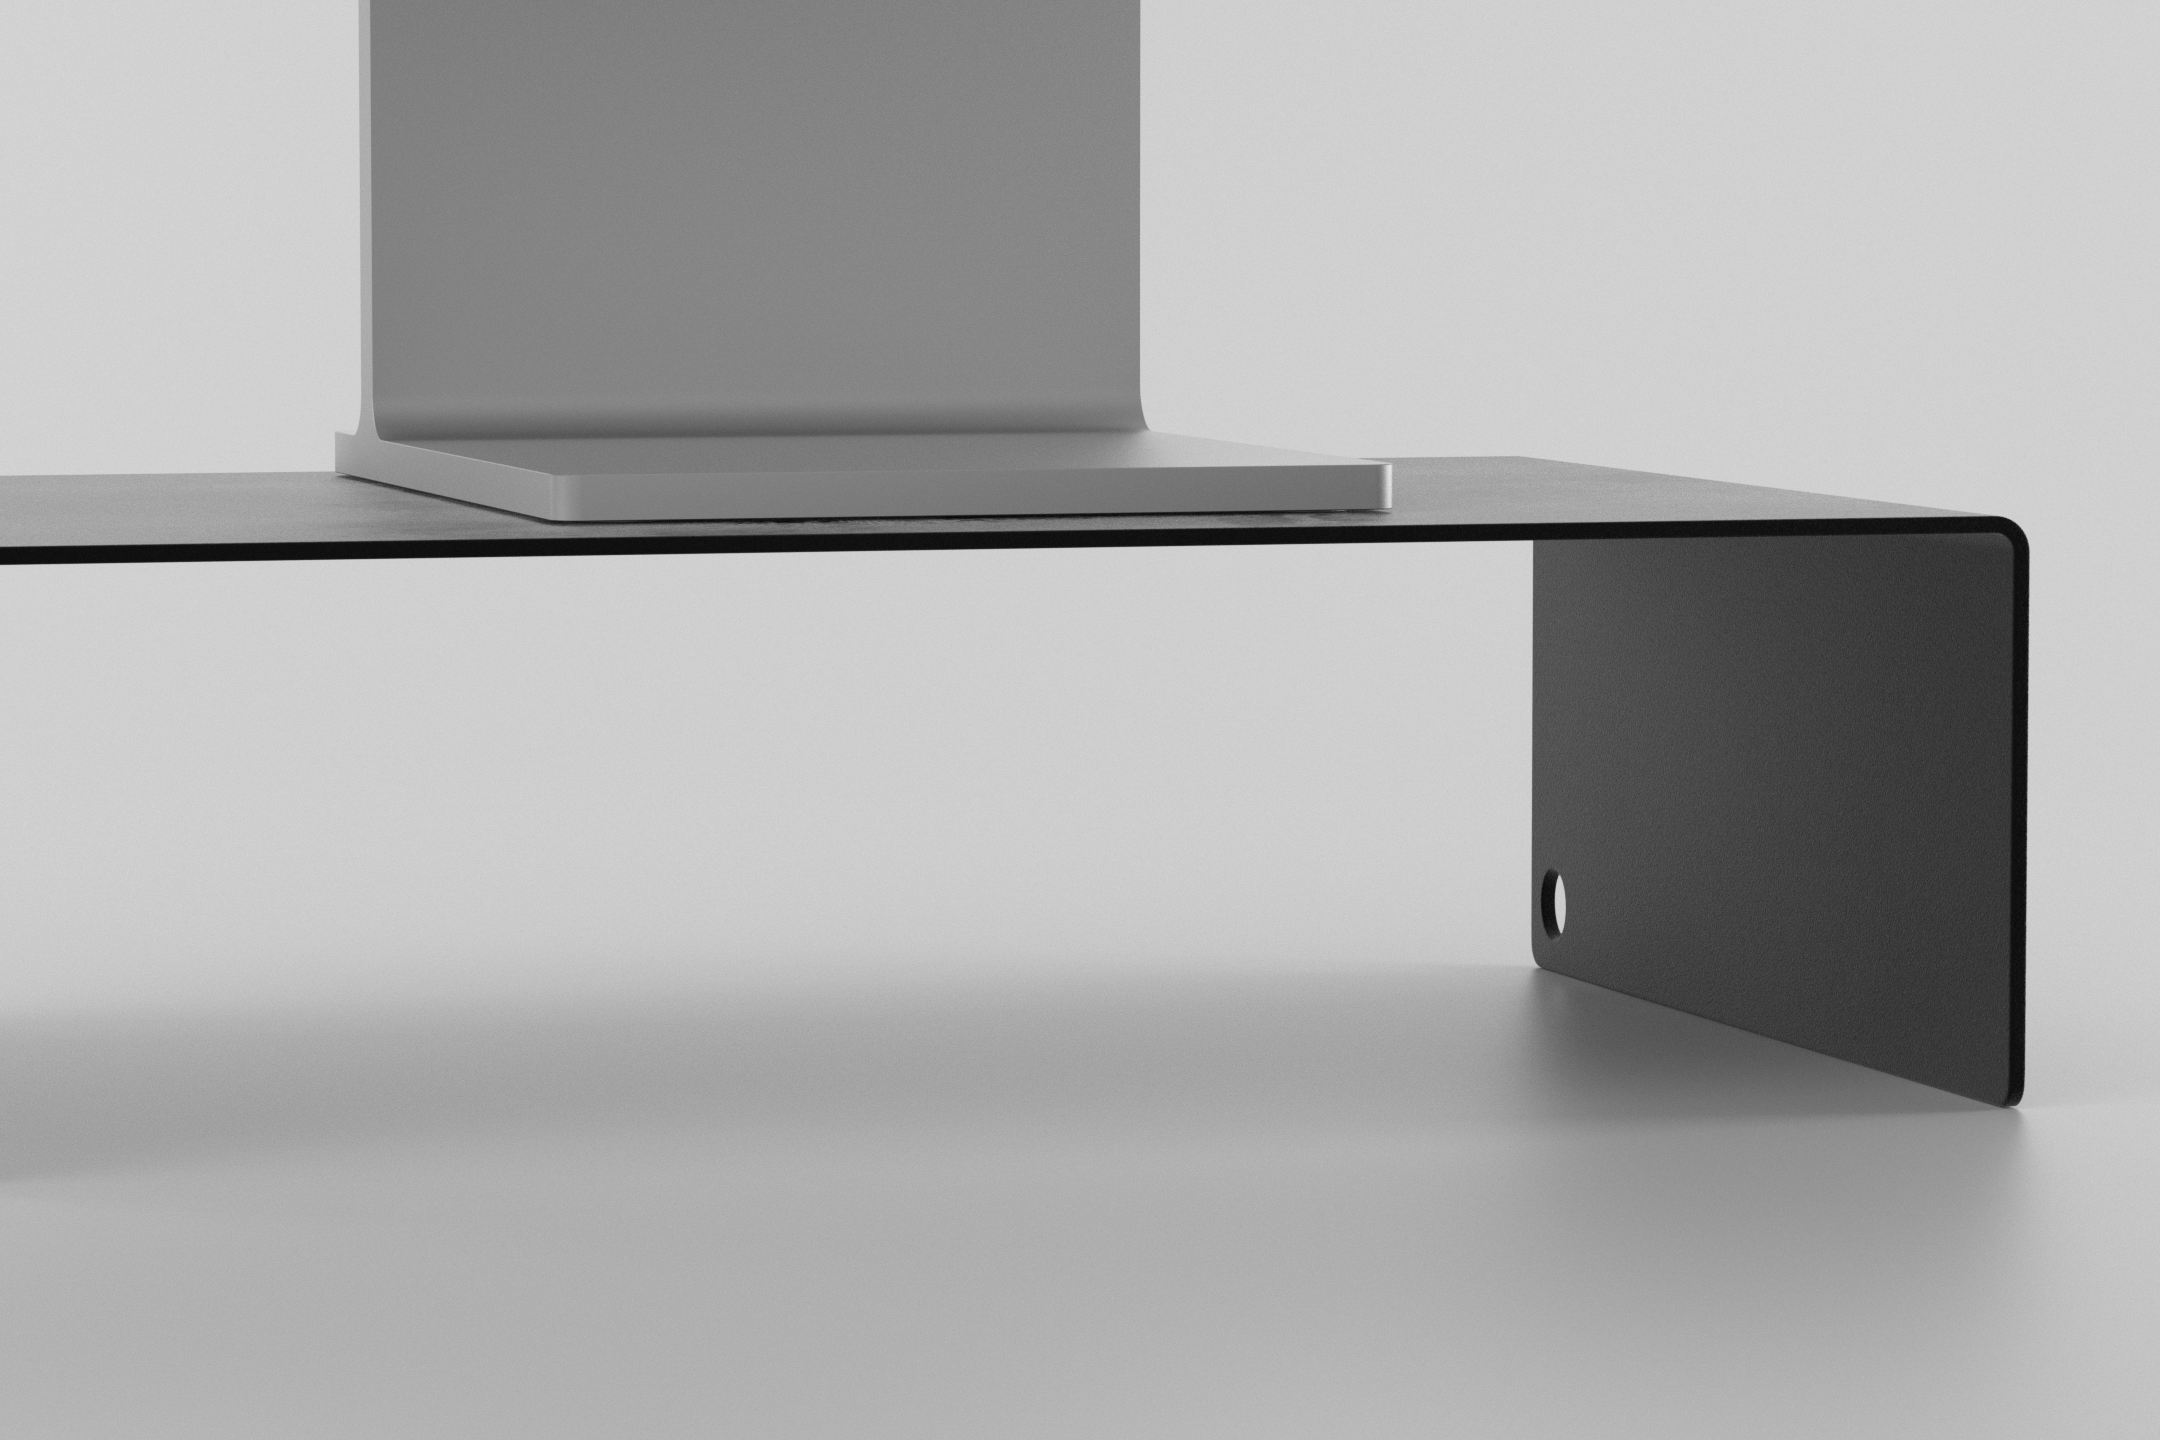 The Monitor Stand - black with display on it